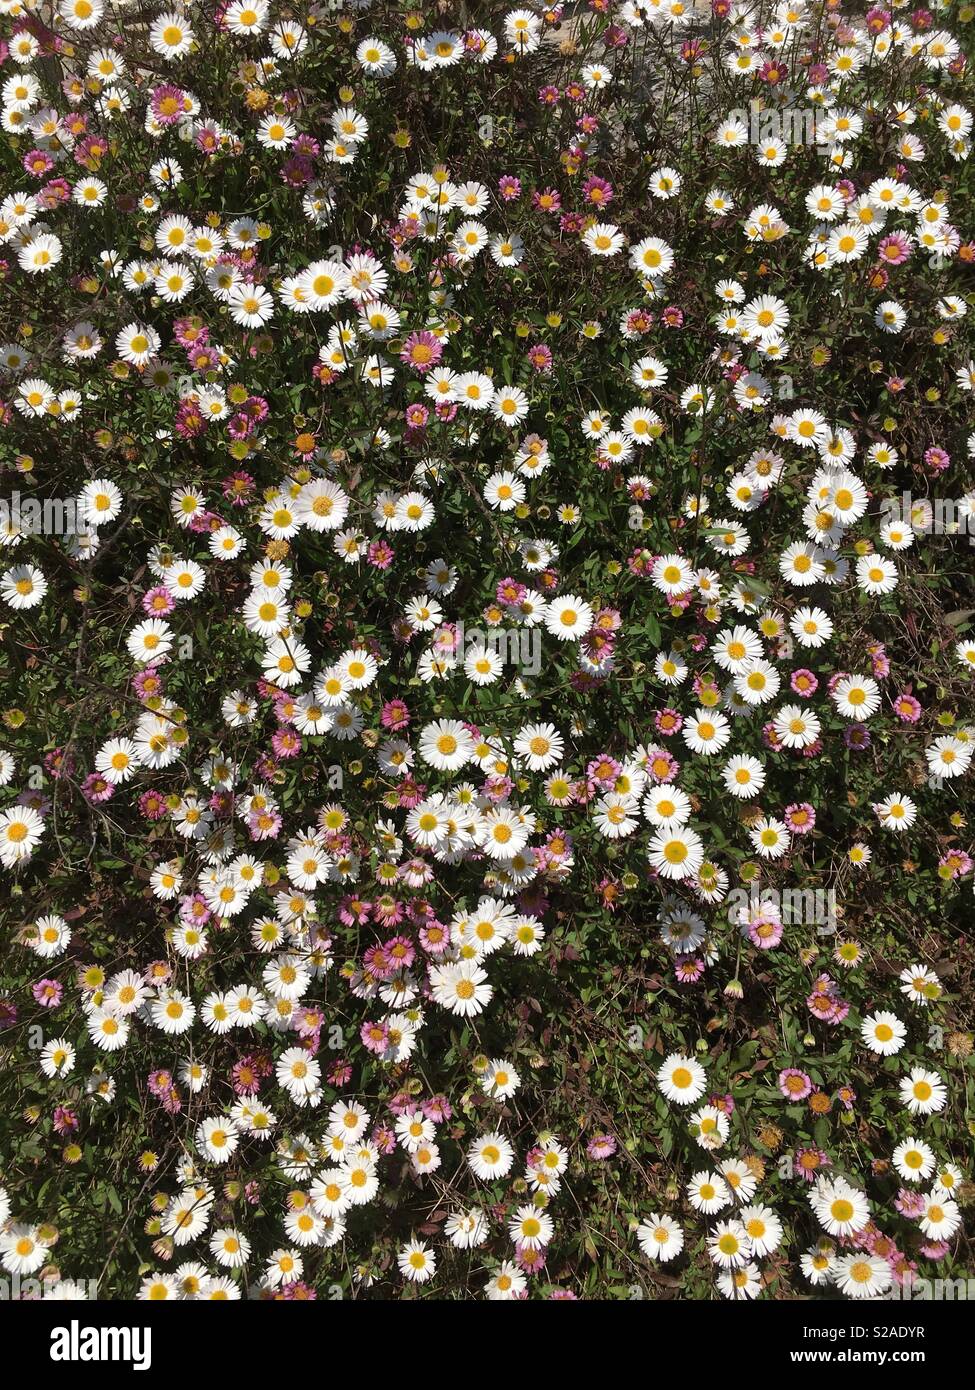 A sea of pink and white daisies in the sunshine. Stock Photo